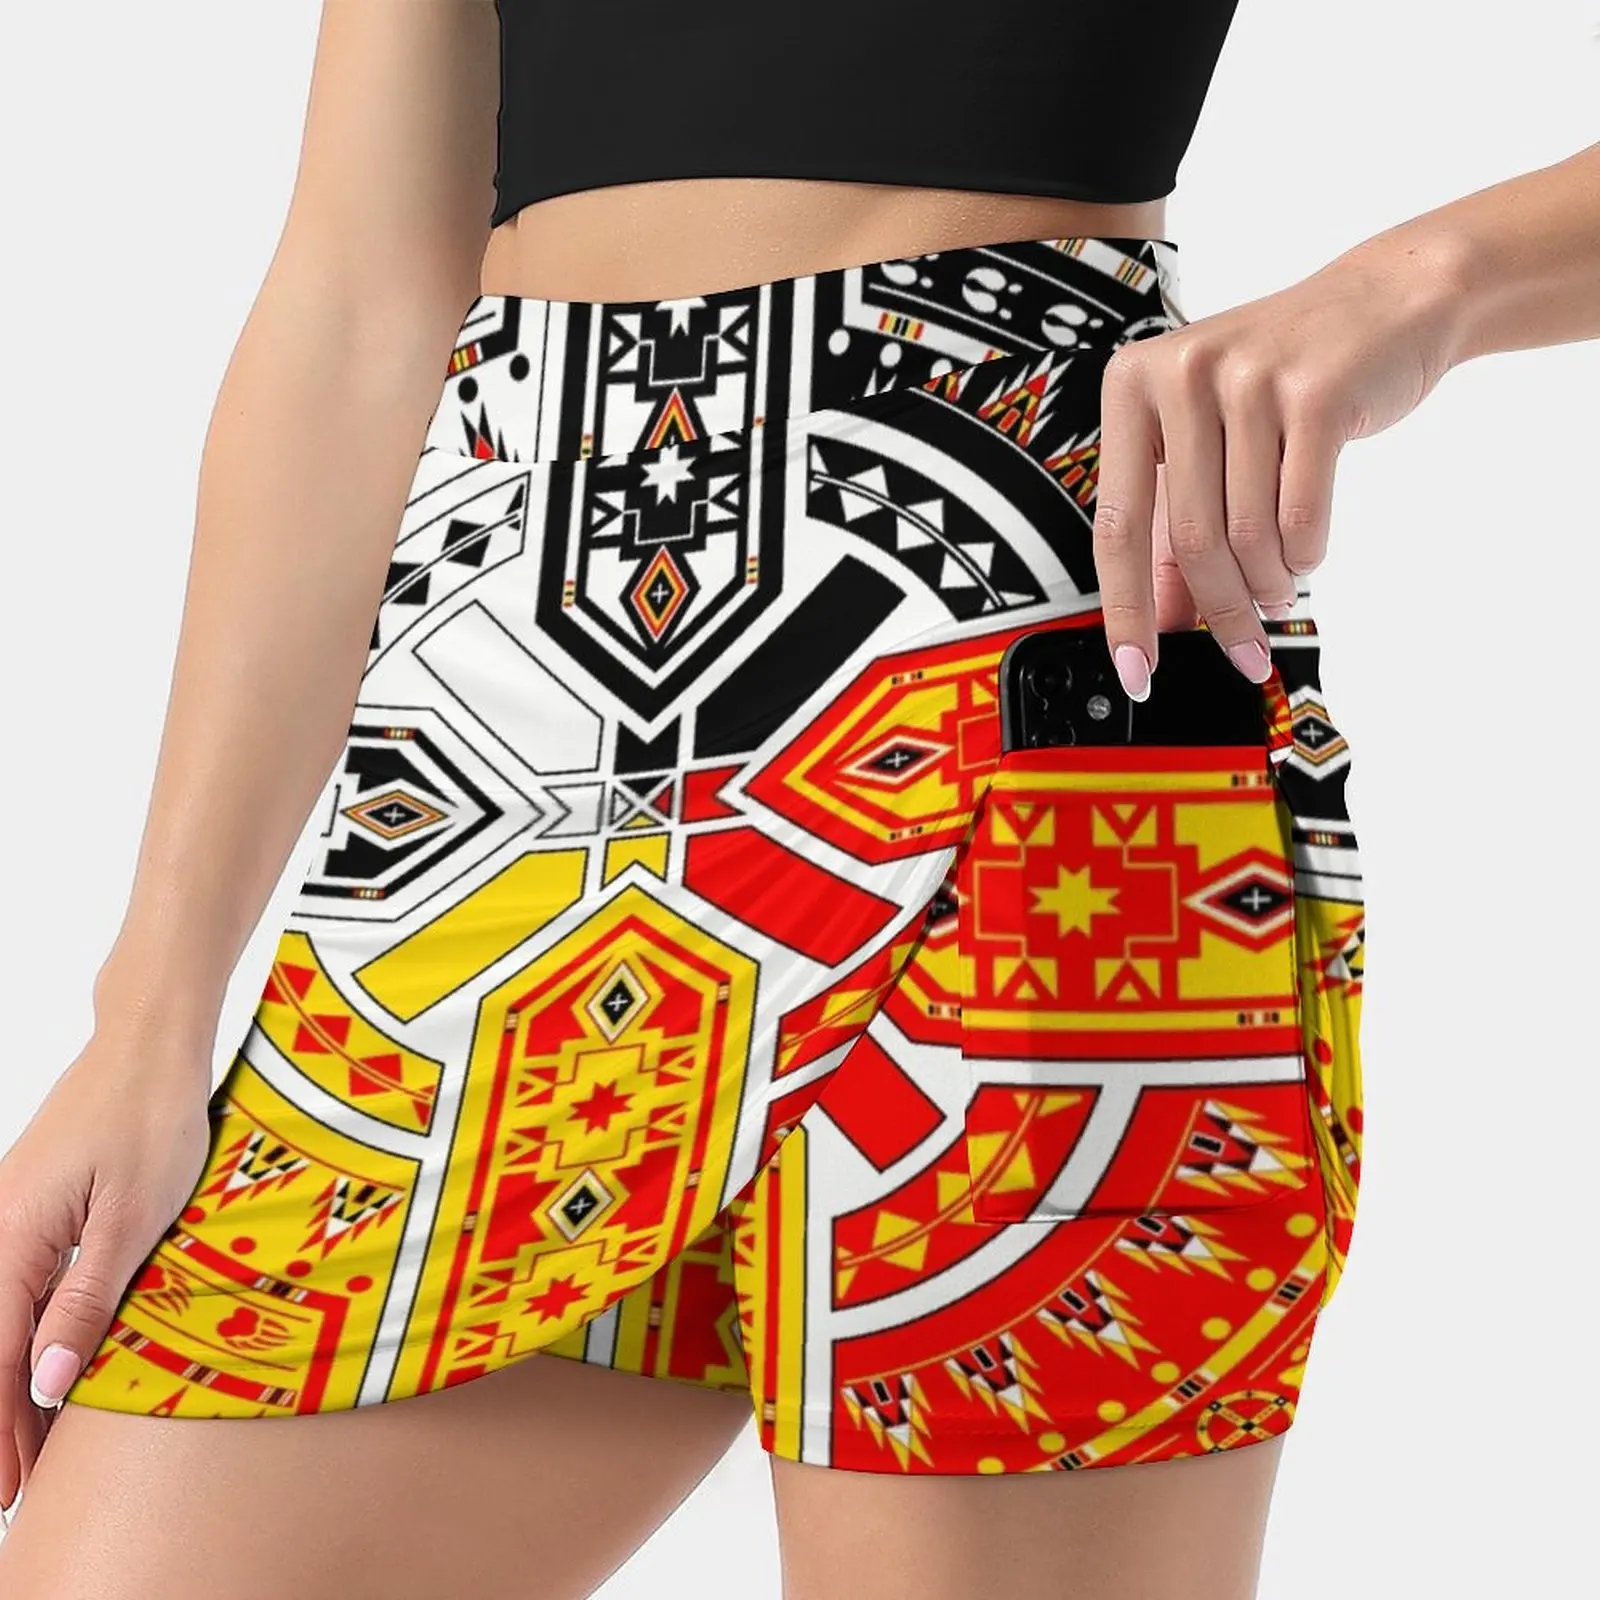 

The Four Direction Women's skirt Aesthetic skirts New Fashion Short Skirts Melvin War Eagle Designs The Four Directions Nature